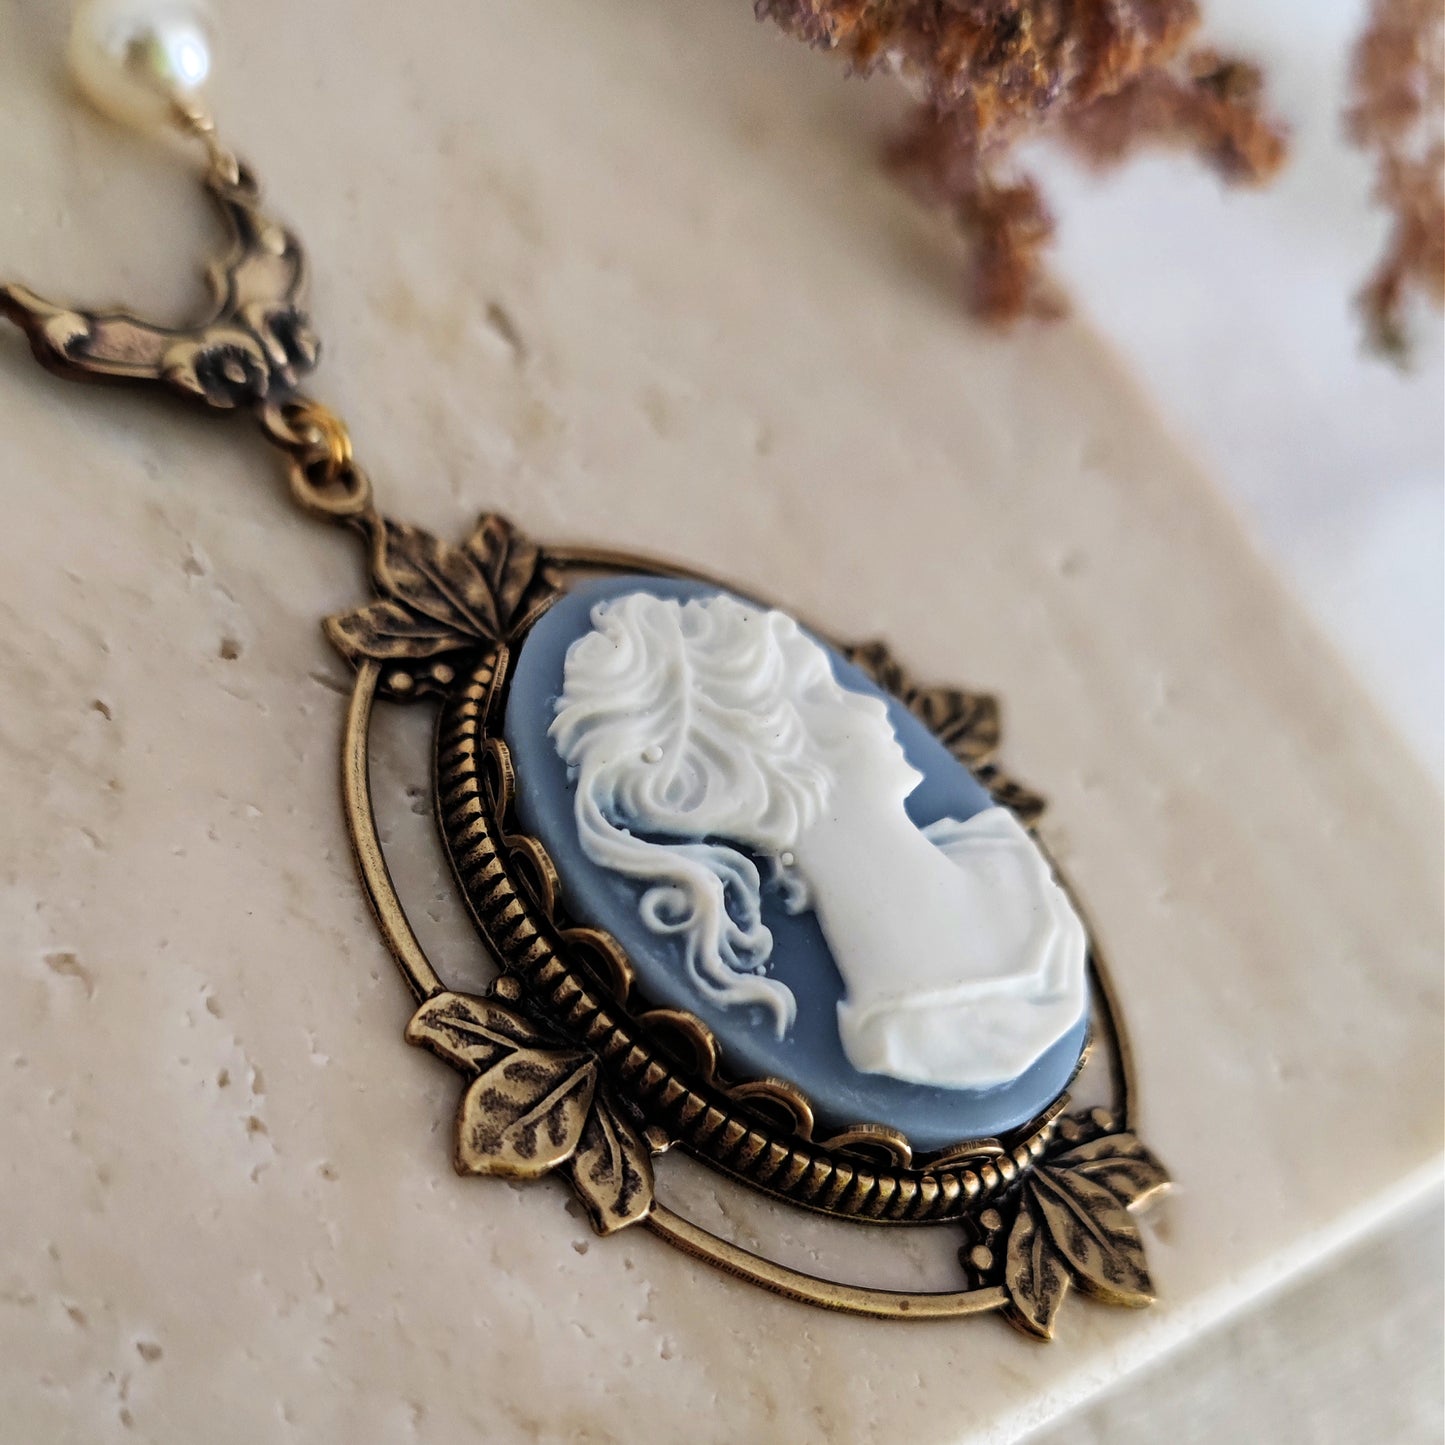 Victorian Cameo Necklace with floral accents, improved silver